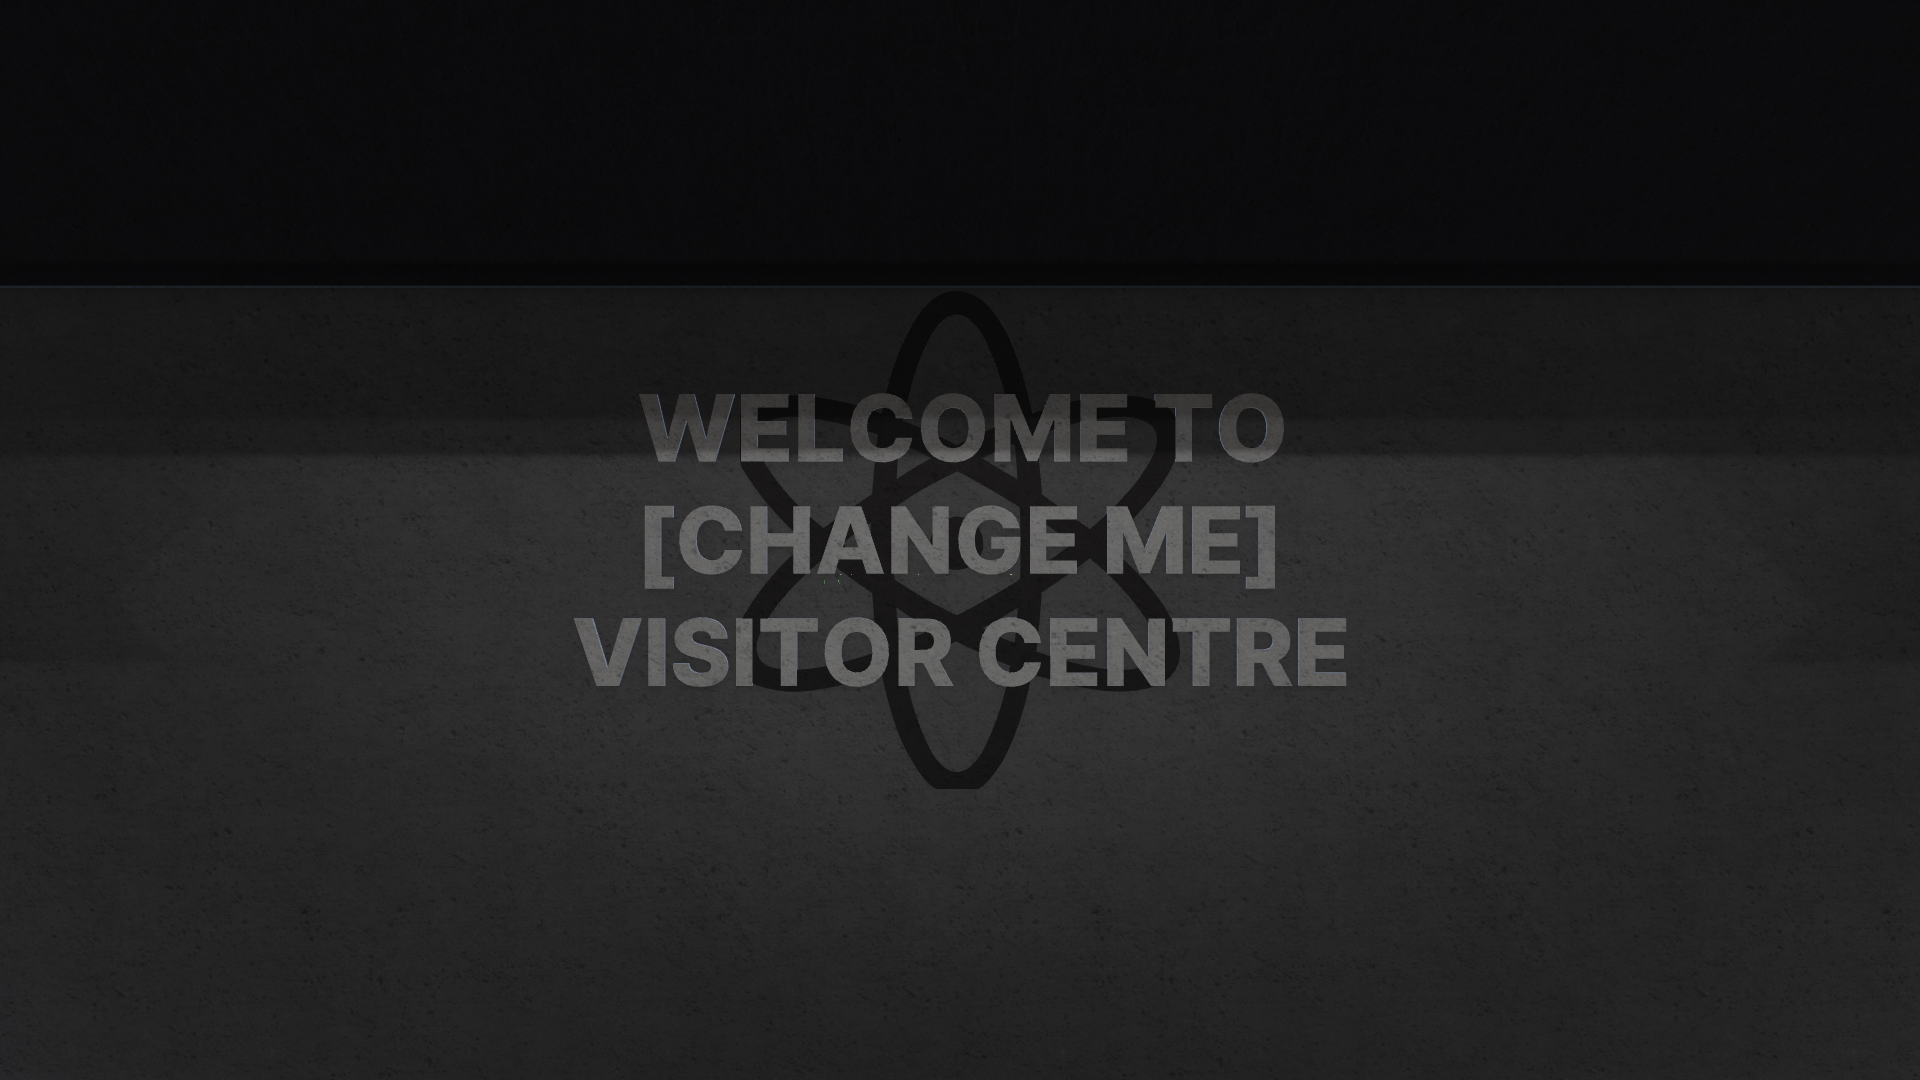 A concrete wall with a atom symbol on it, in front of the symbol is the words 'Welcome to [change me] visitor centre' SIC